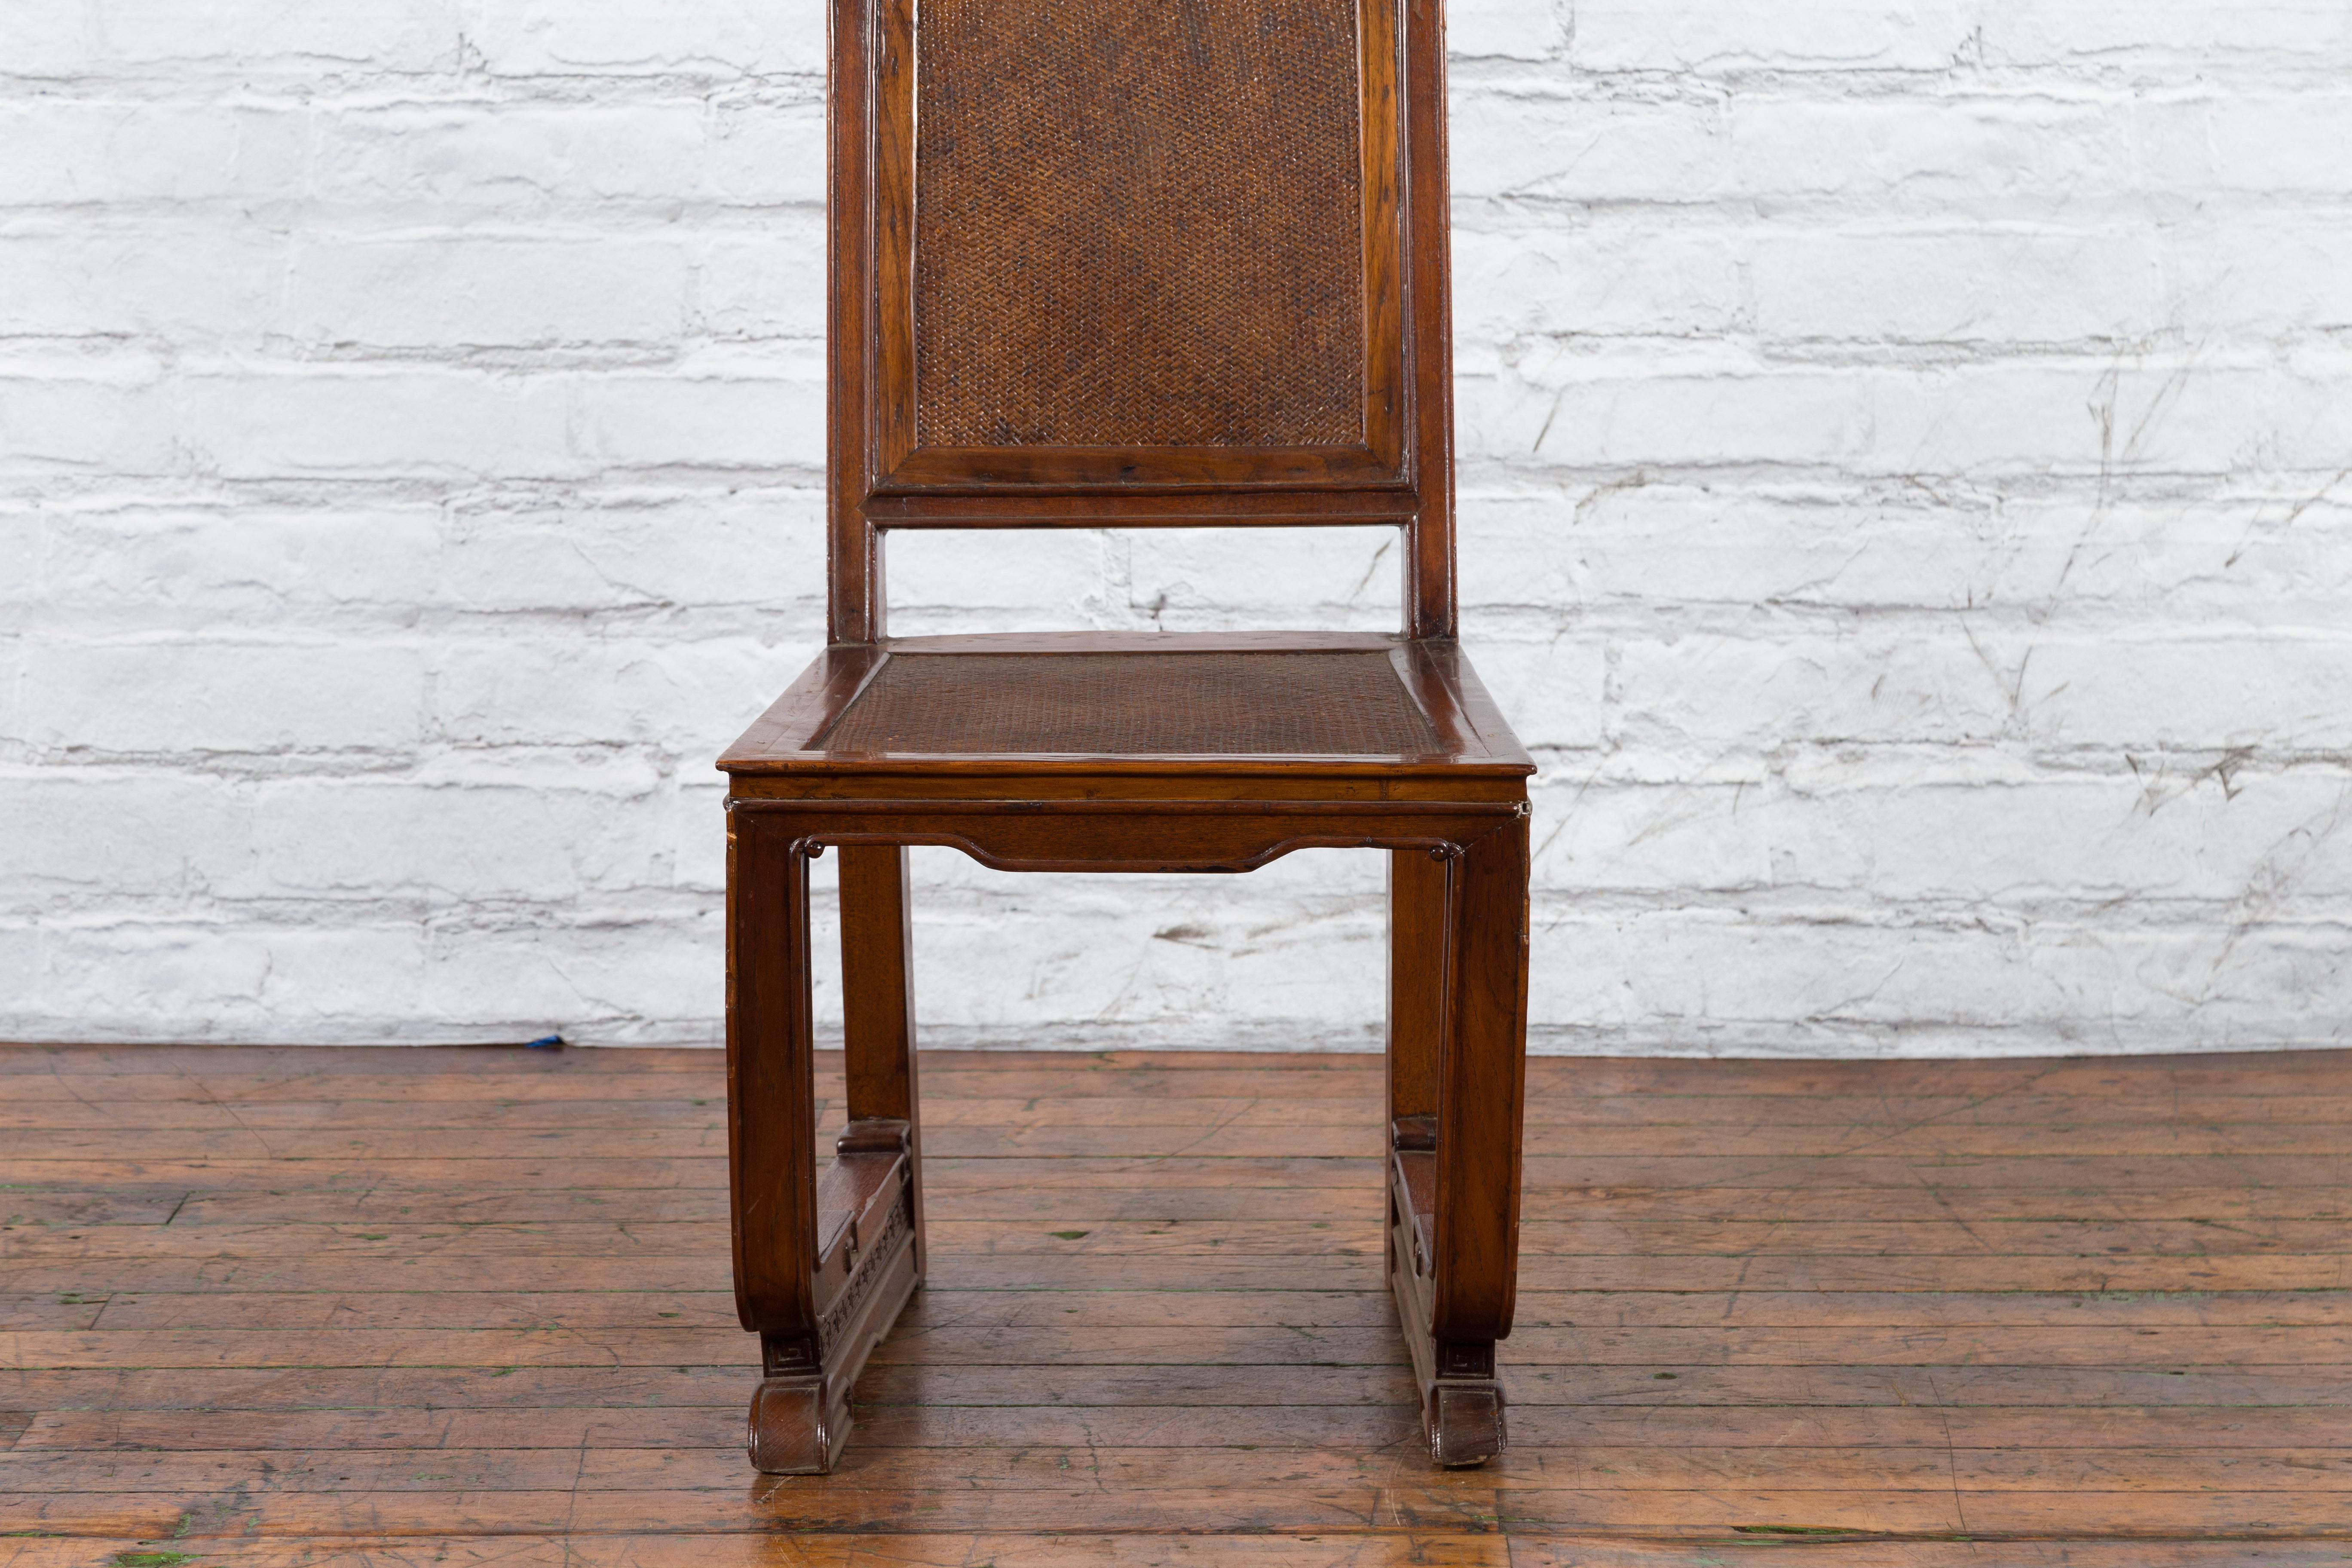 Chinese Qing Dynasty Period 19th Century Wooden Side Chair with Rattan Accents For Sale 3